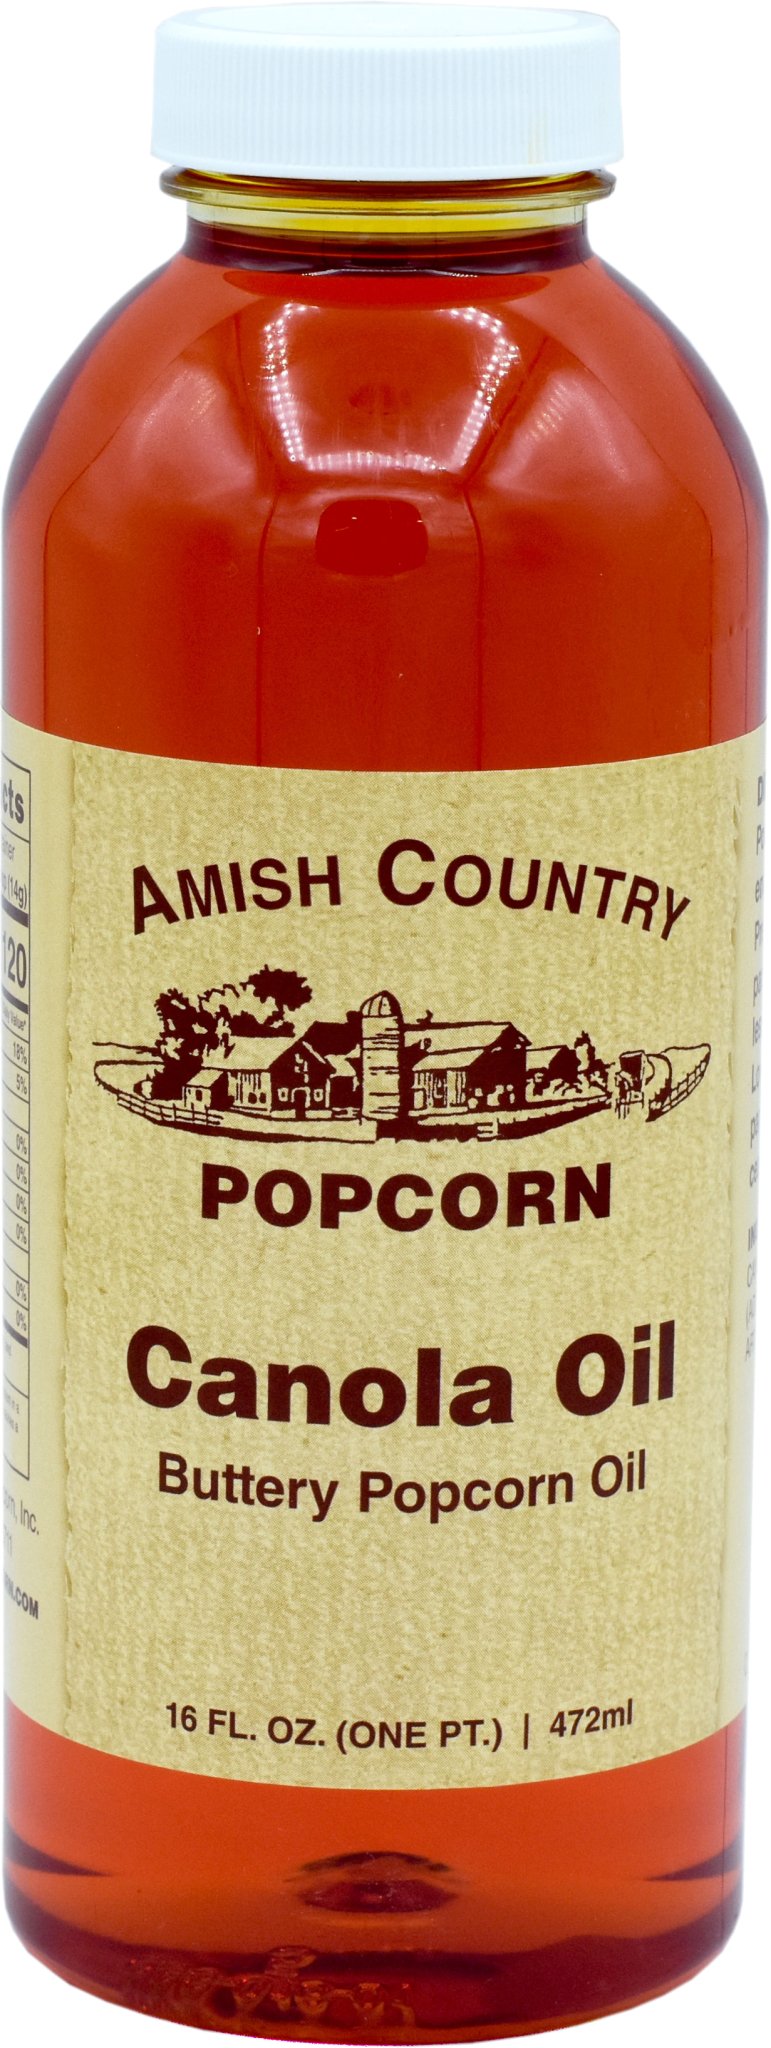 Amish Country Popcorn - 16oz. Bottle of Canola Oil - Pacific Flyway Supplies